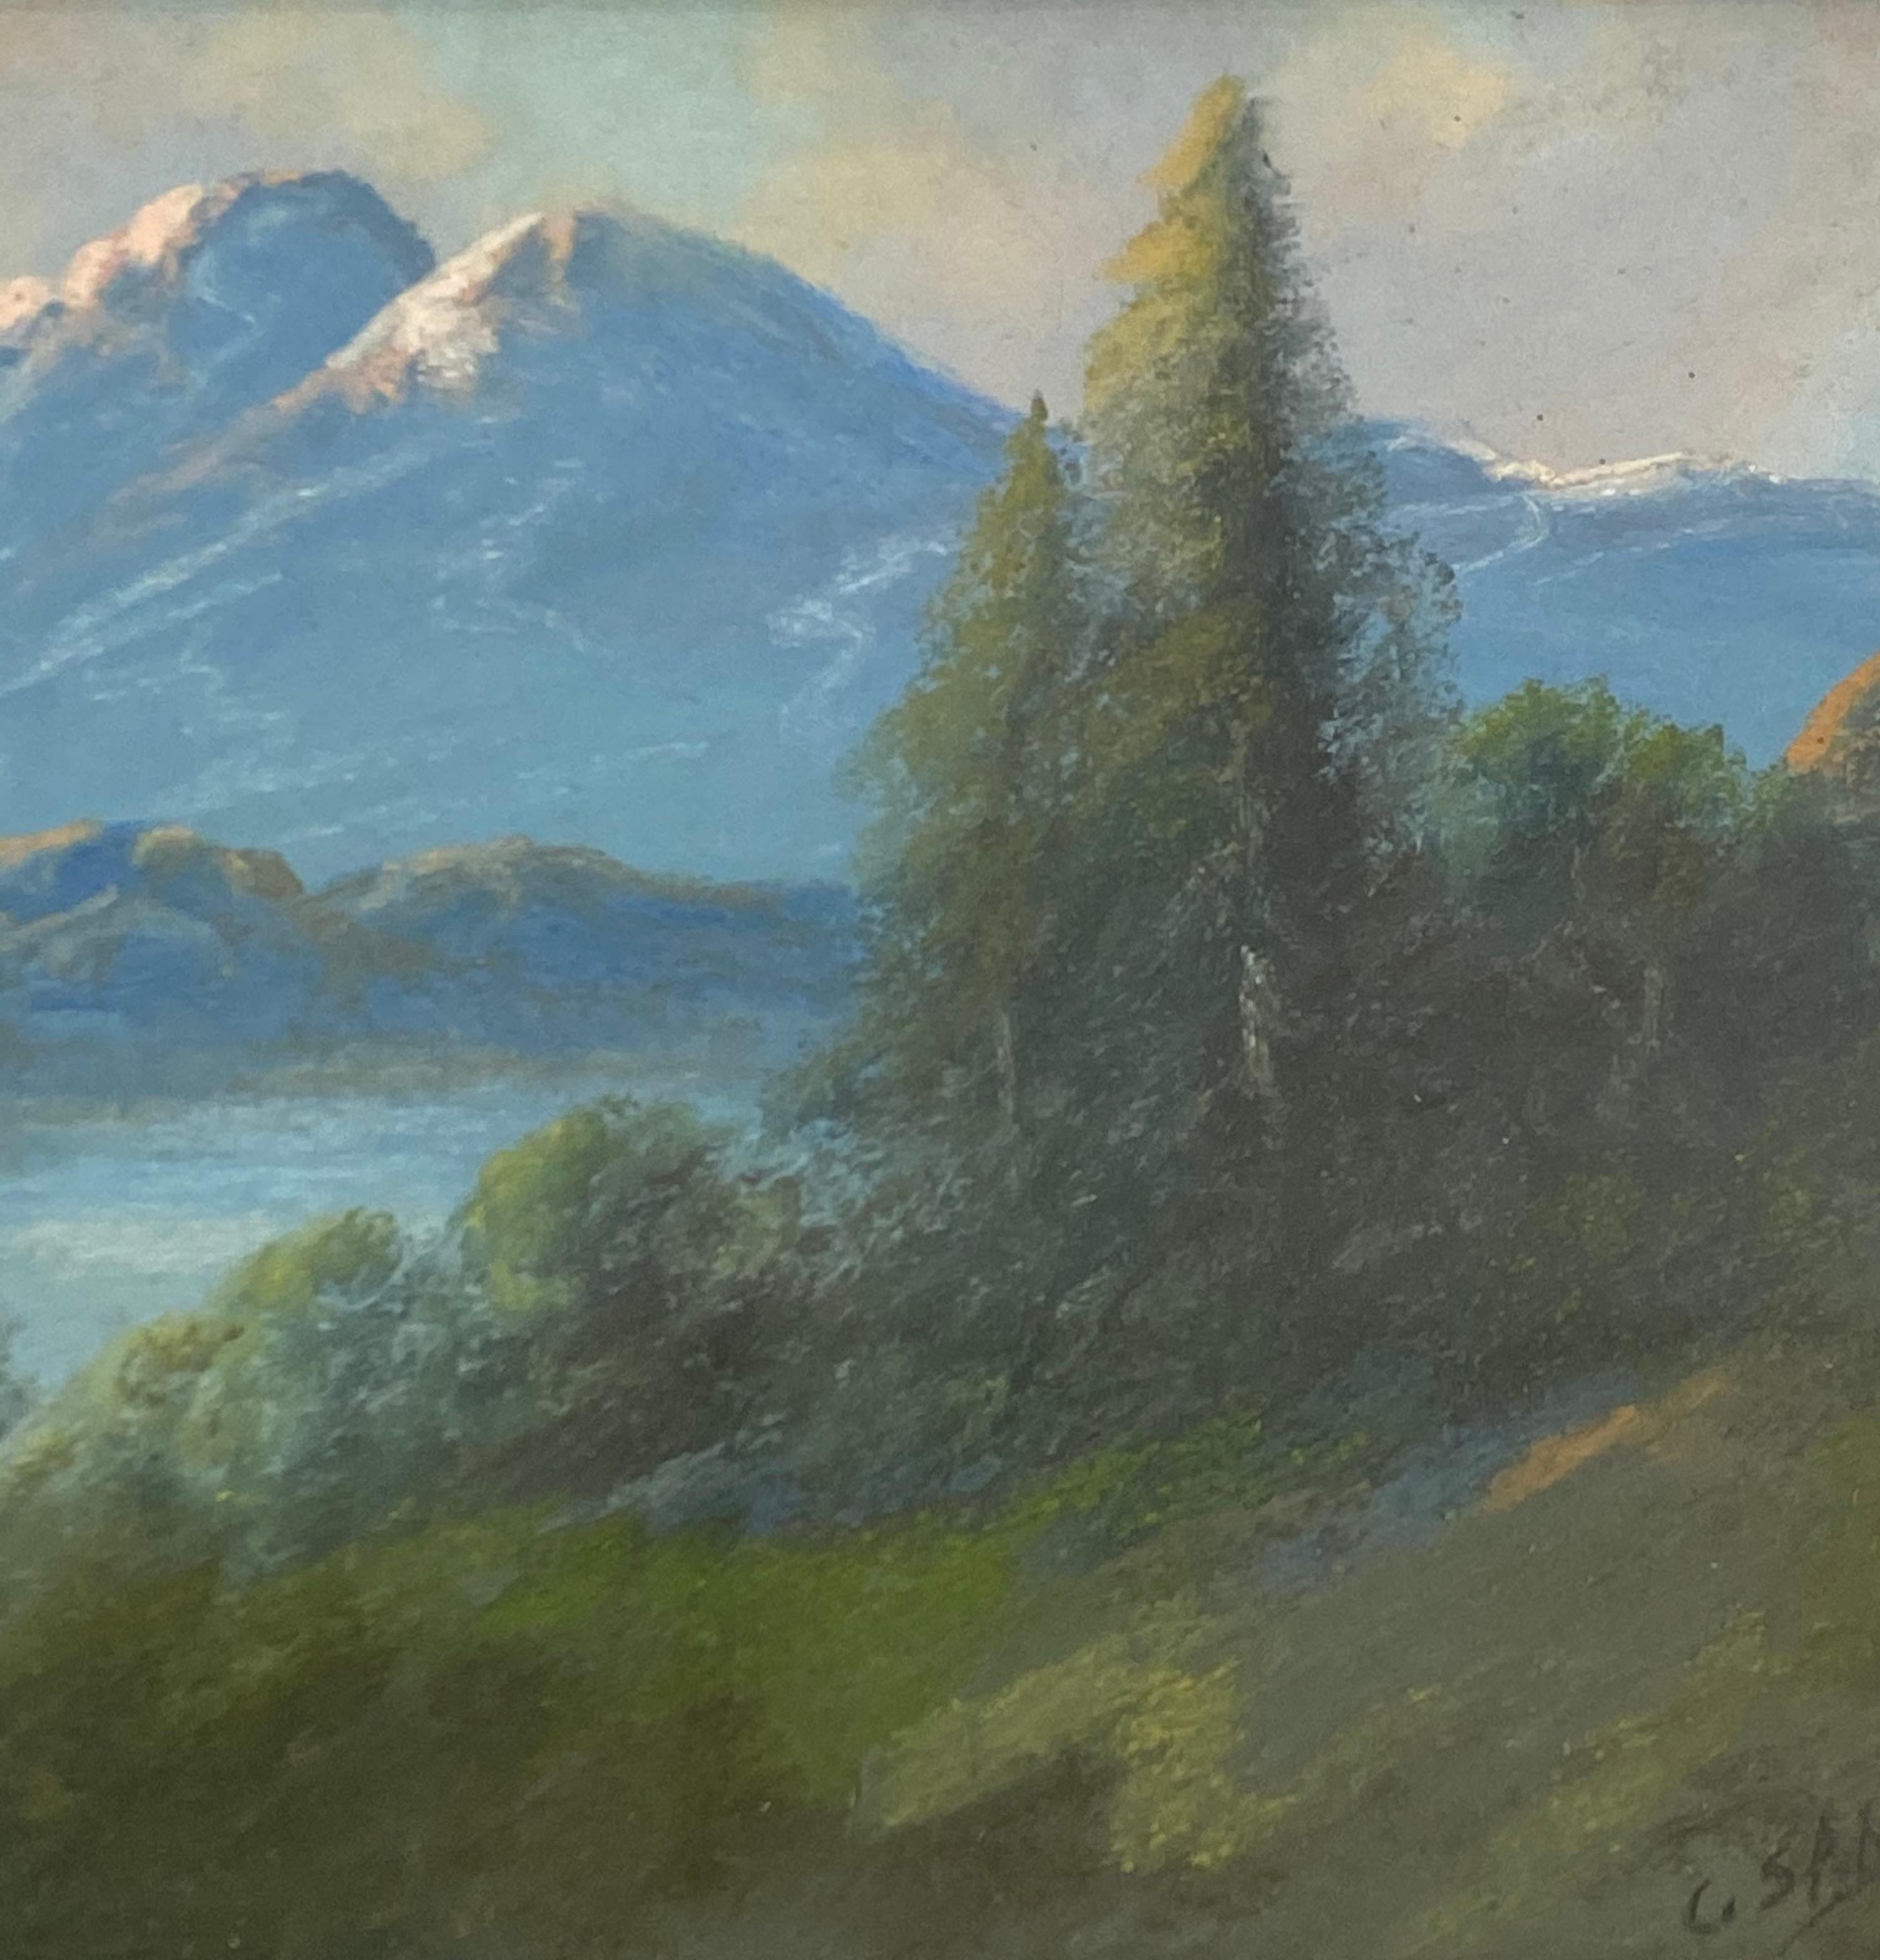 Carl Sammons Western Mountain Landscape Pastel Painting C.1920

Small but mighty landscape by noted artist Carl Sammons

Original pastel on paper

Dimensions 8.5